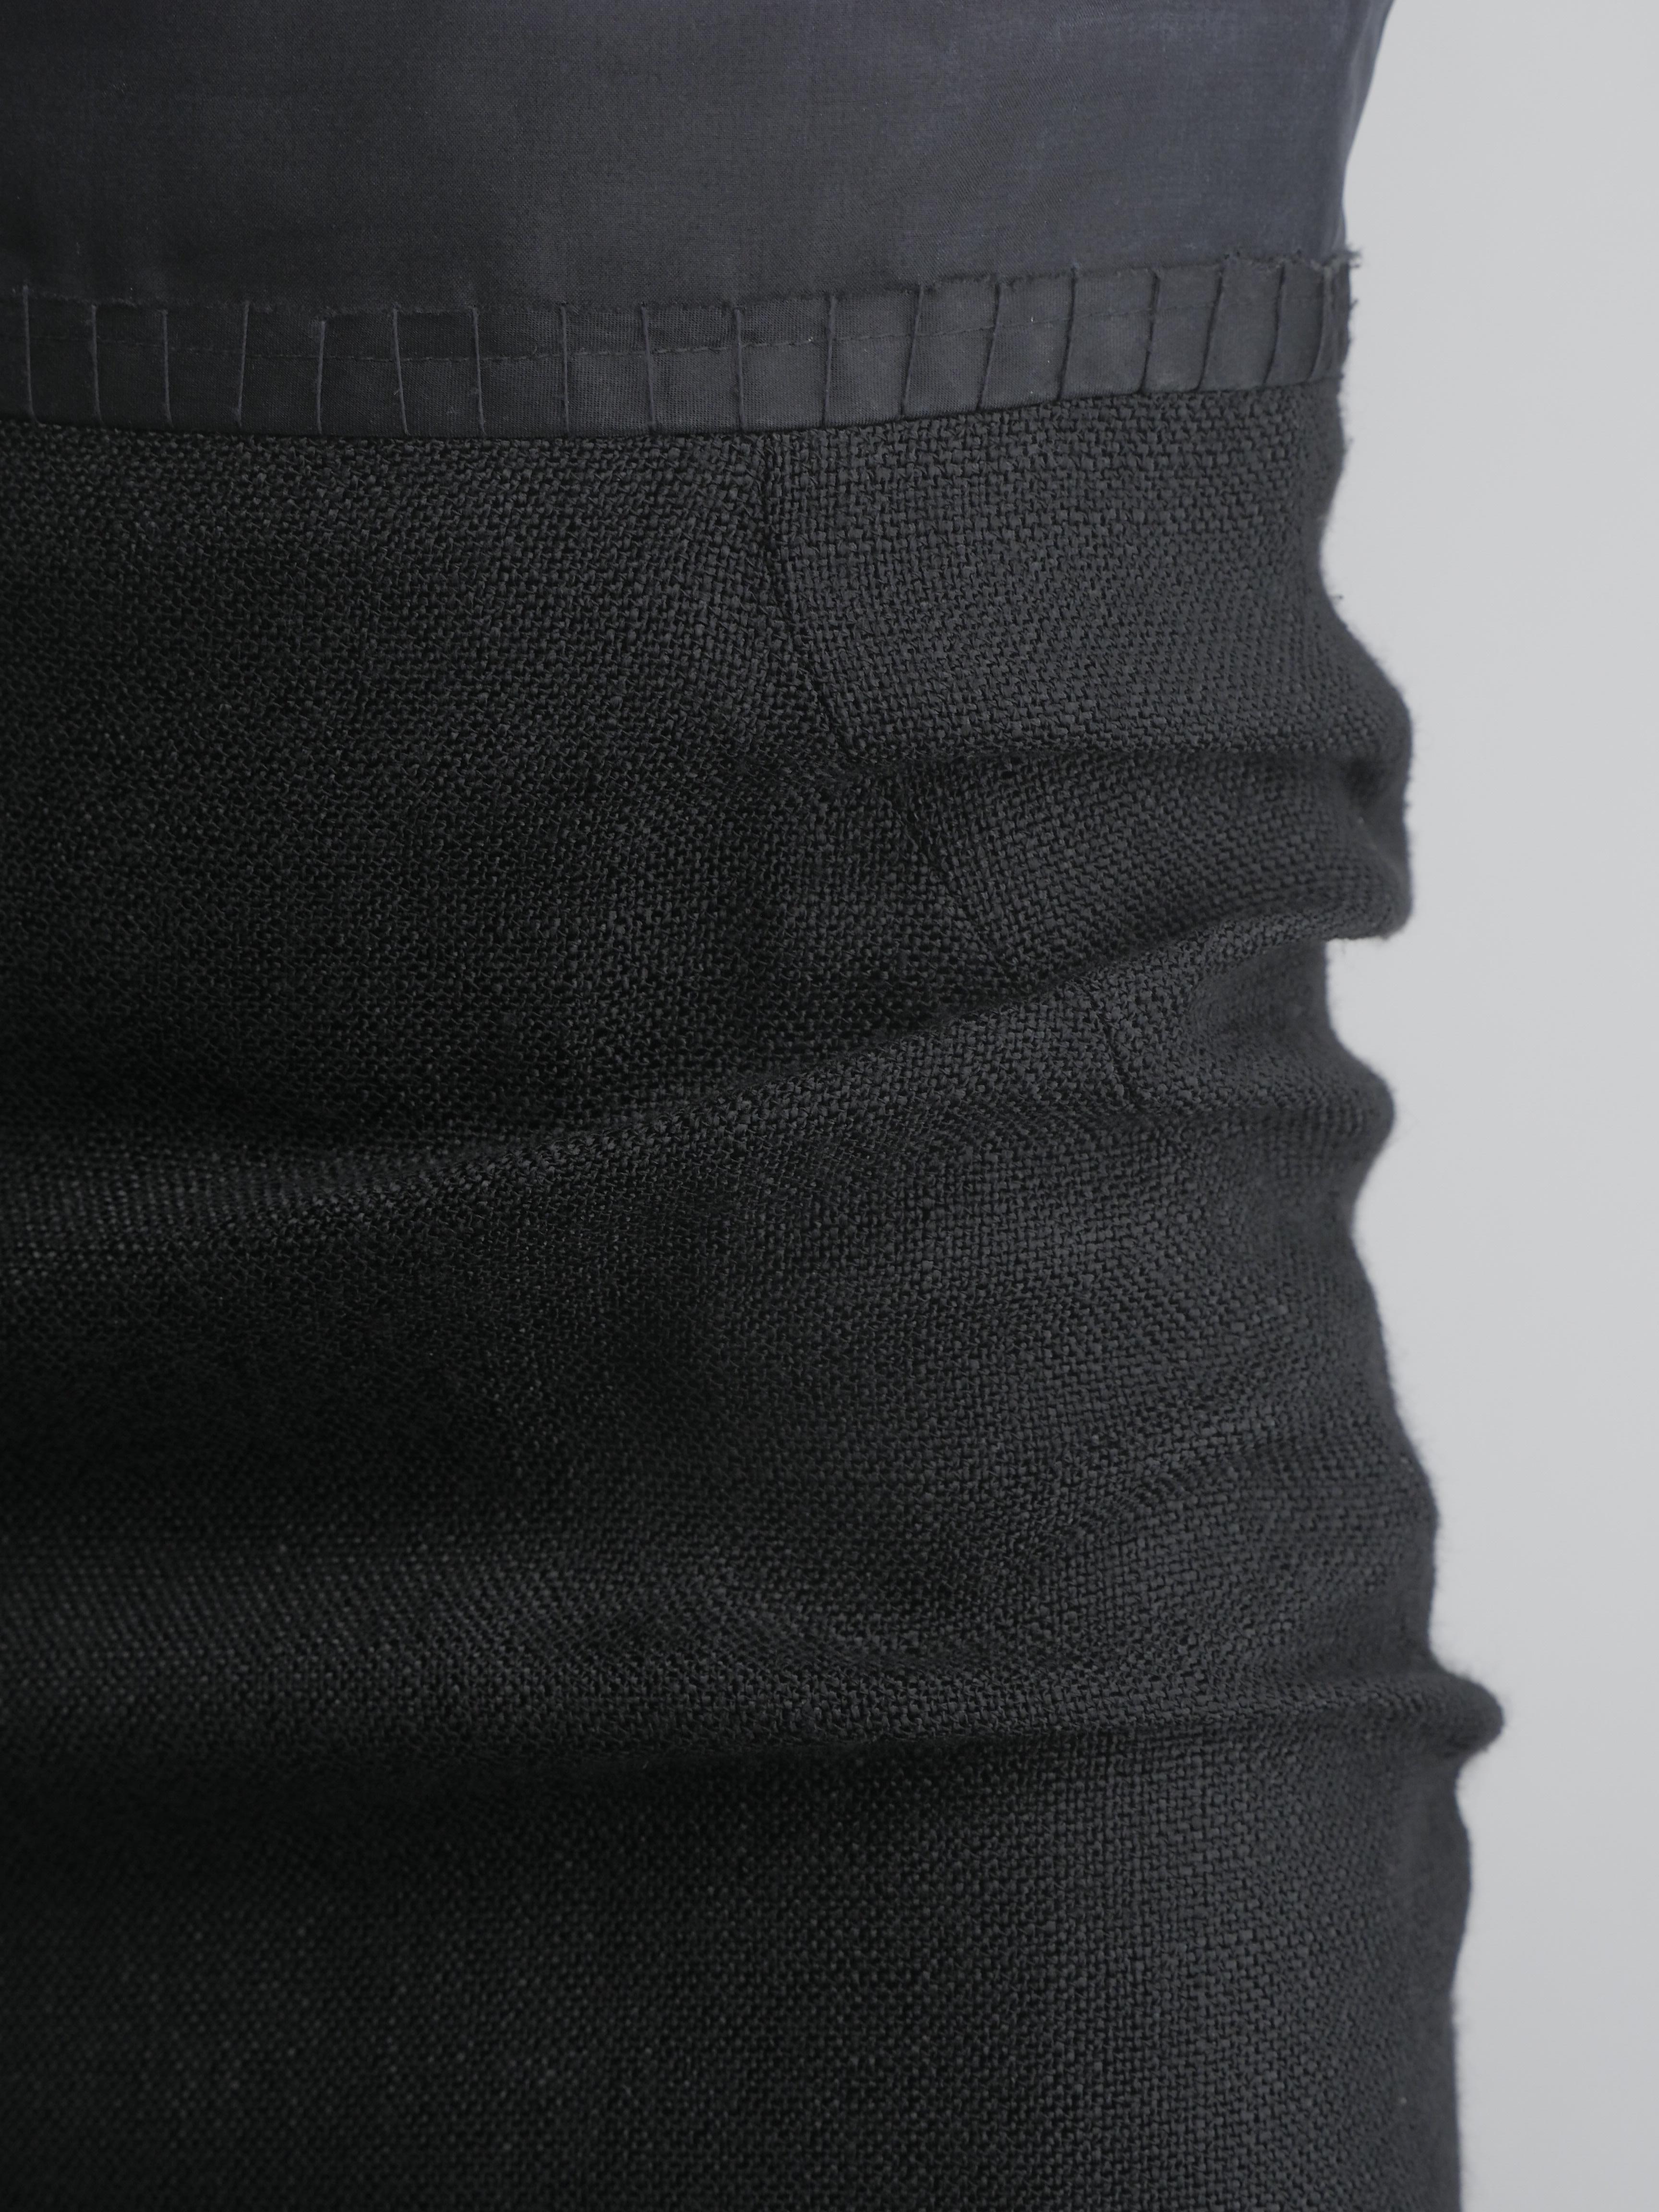 Black Linen Pencil Skirt with patchwork detail and button detail